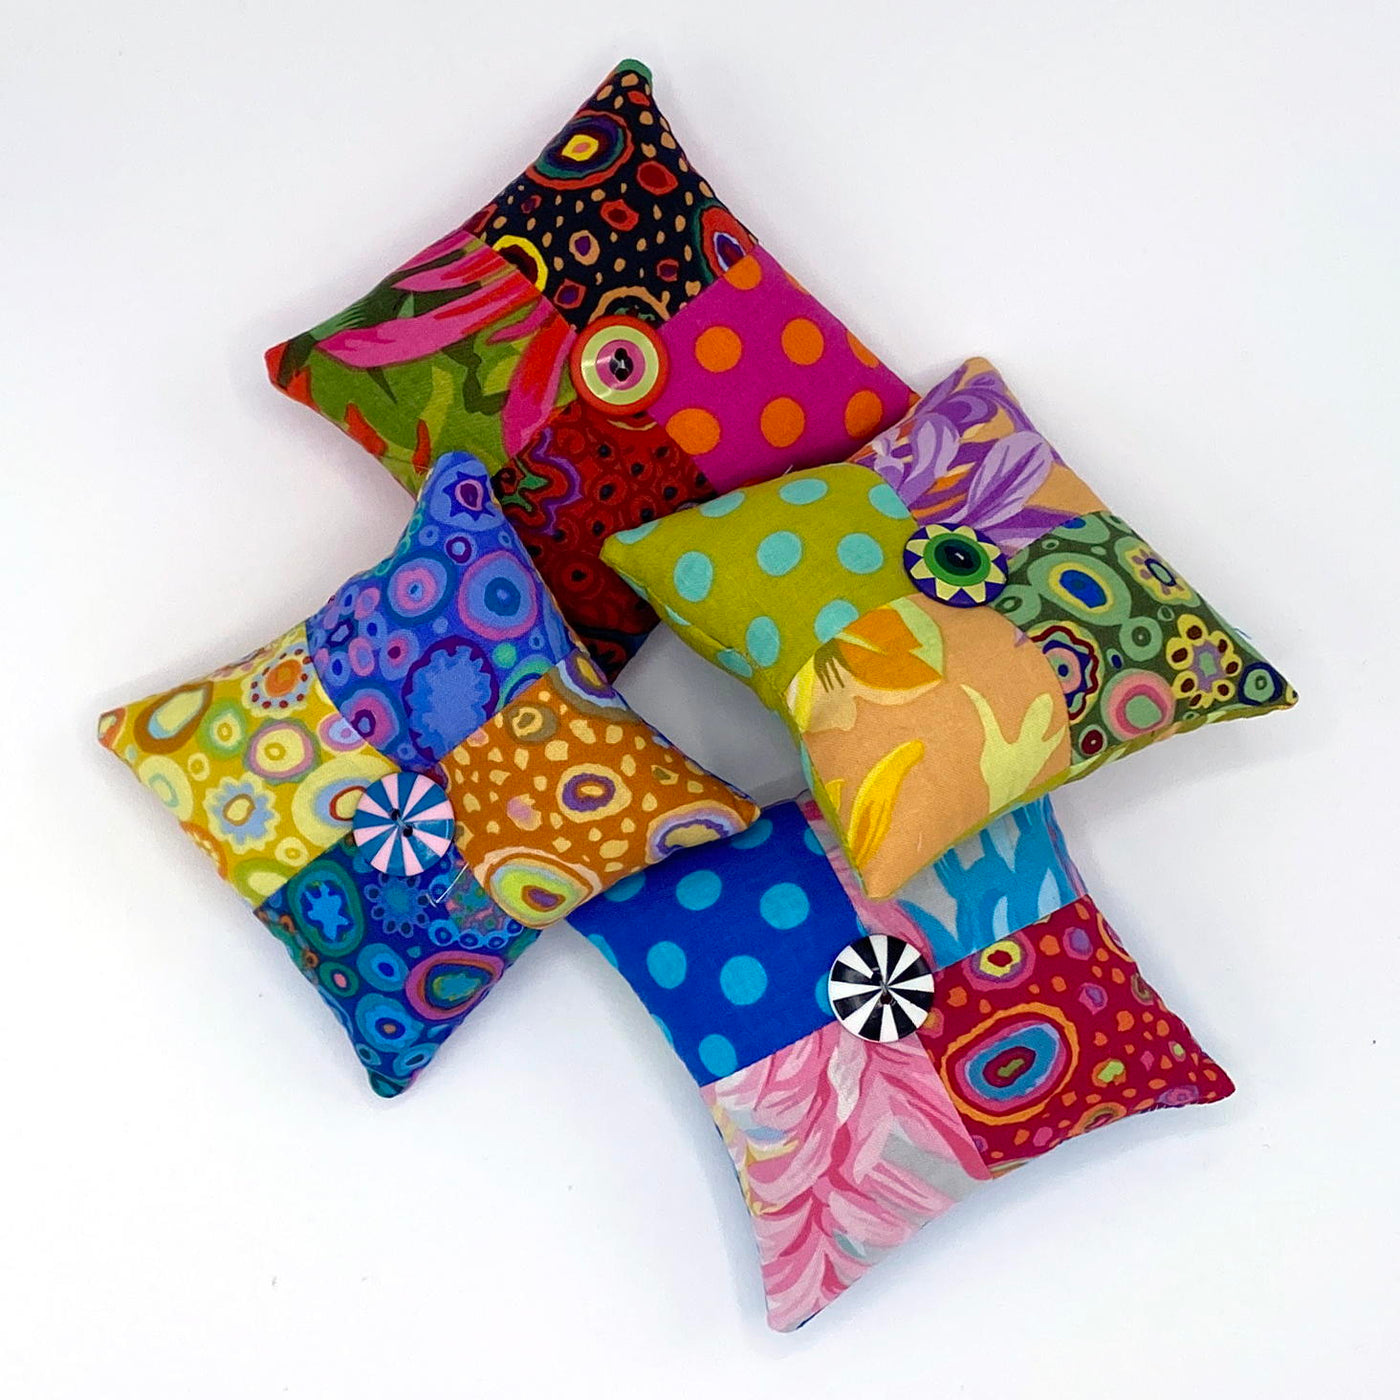 Four Patch Pincushion - Free Downloadable Sewing Pattern